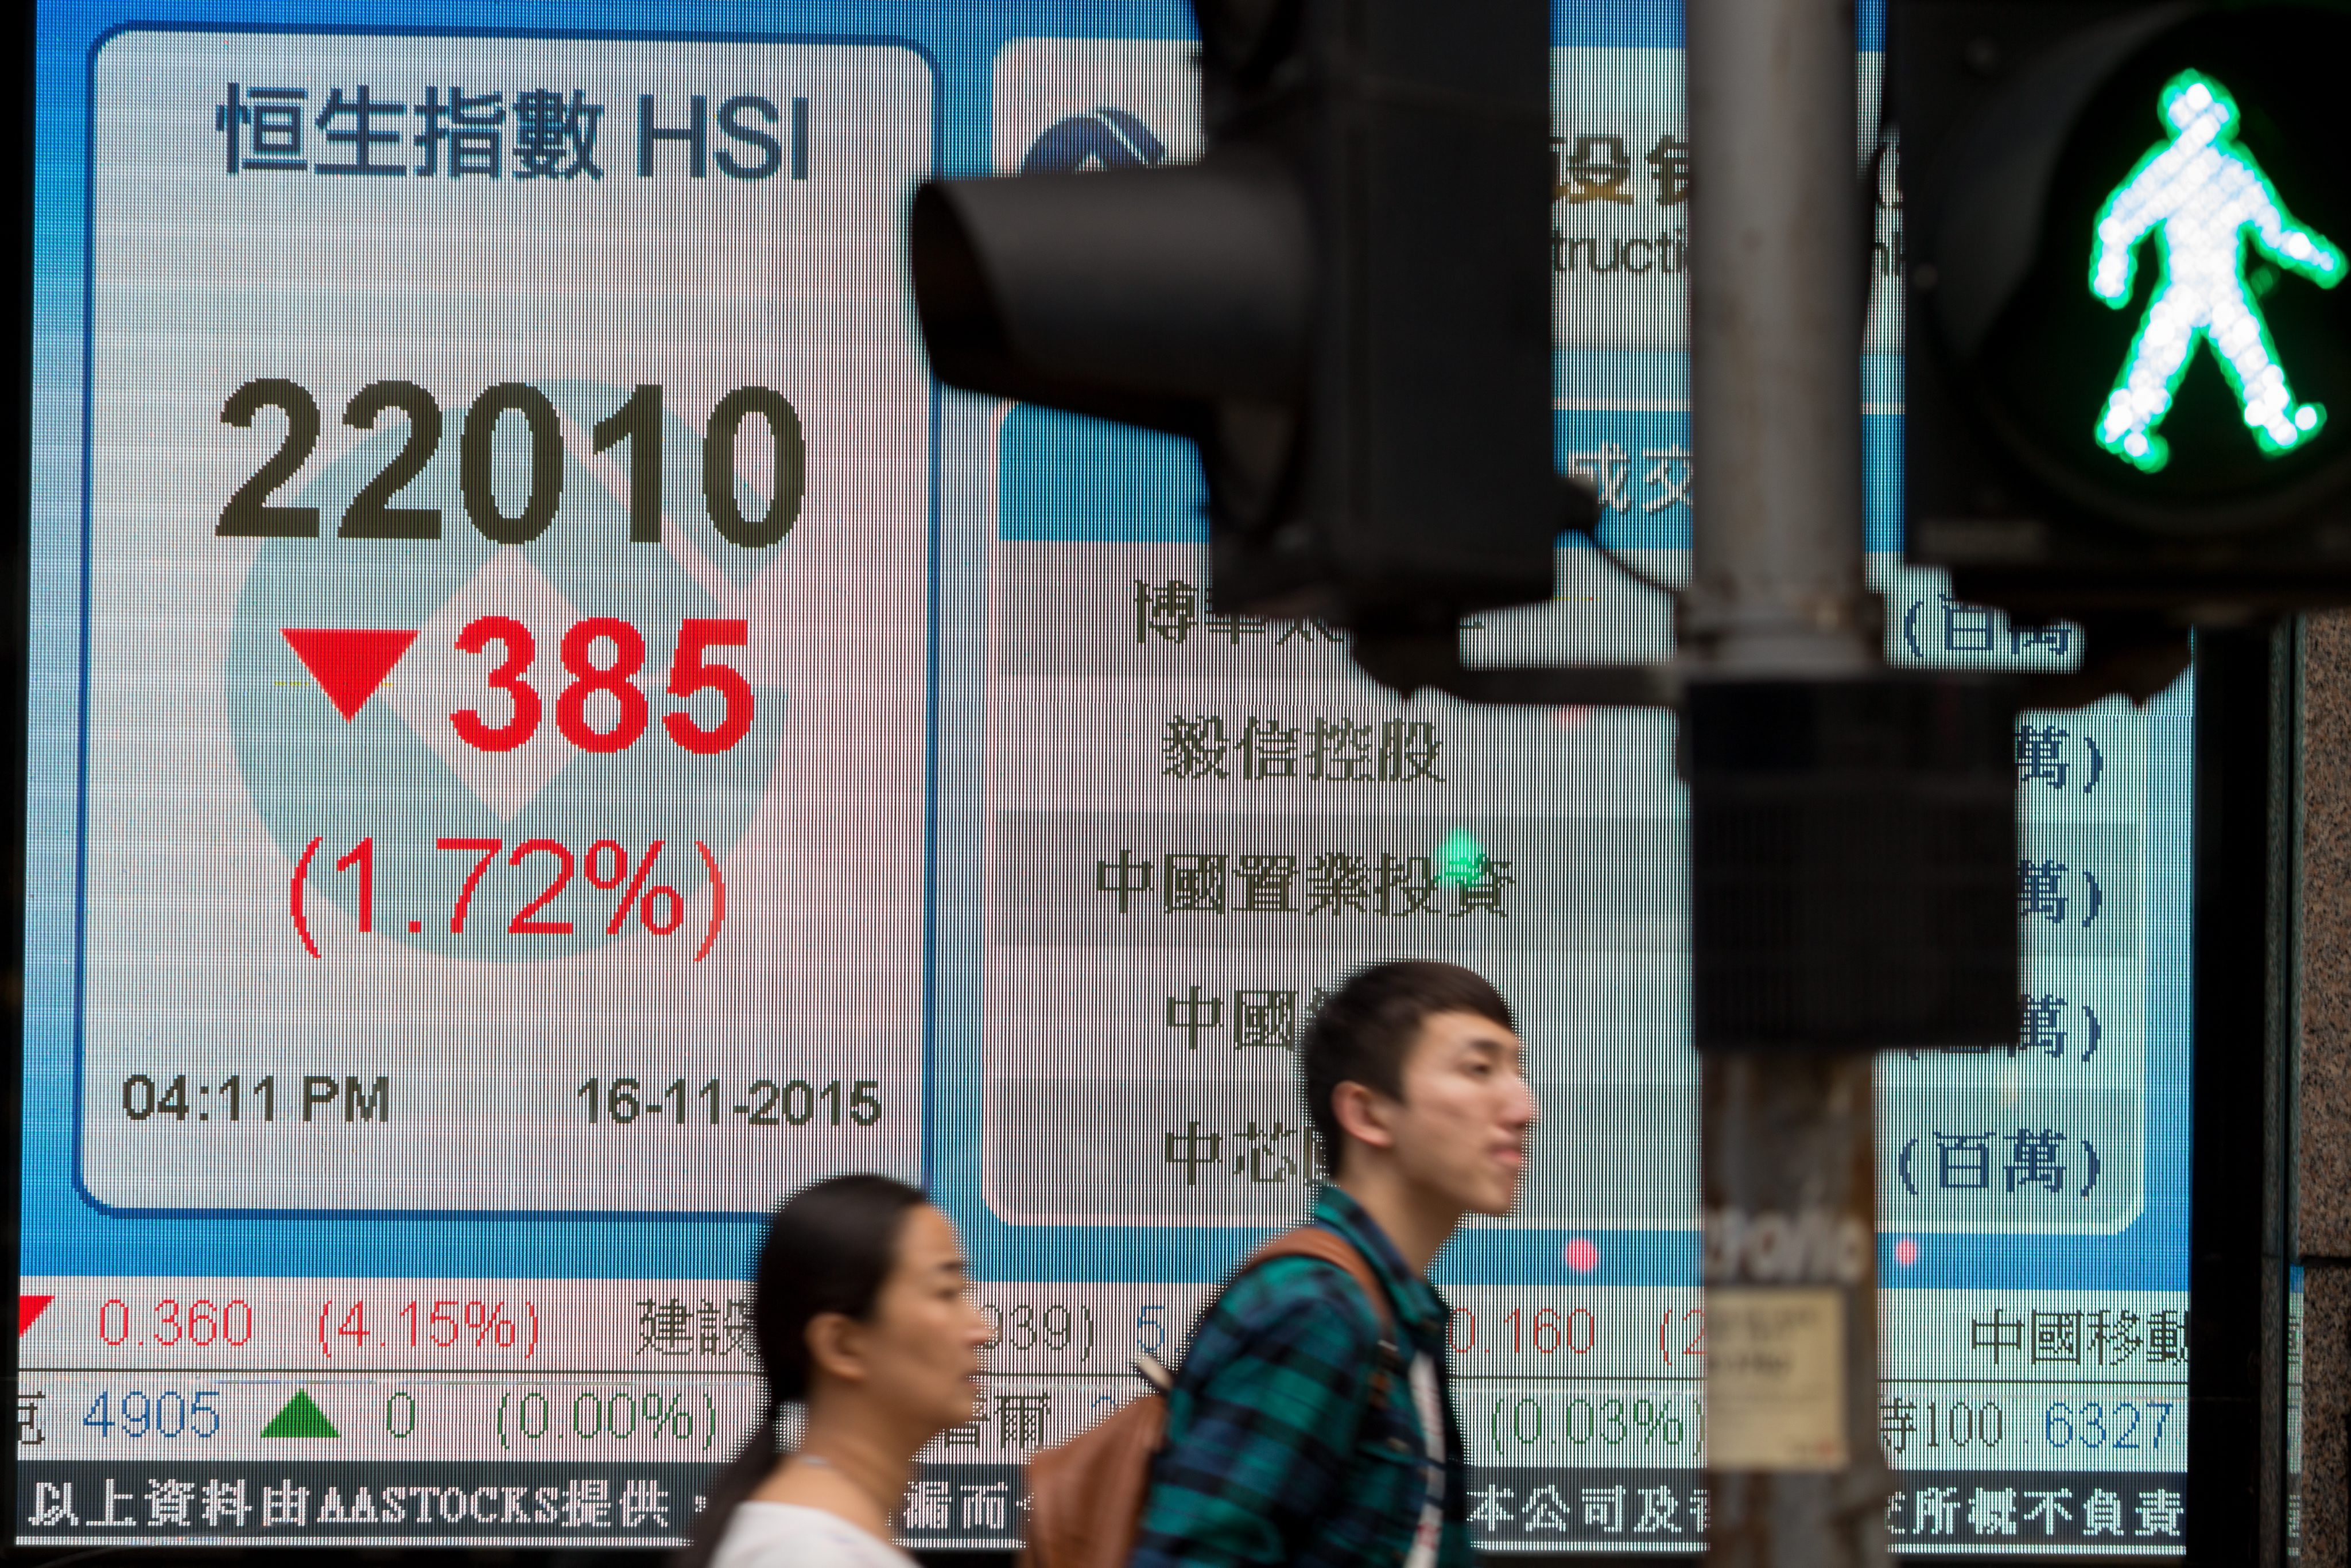 epa05027752 Pedestrians walk past a electronic board displaying the closing Hang Seng Index figure in Hong Kong, China, 16 November 2015. Stocks across Asia were down Monday in the first day of trading after the Paris terrorist attacks which left about 130 people dead. The Shanghai composite index opened down at 3,522.46 and closed at 3606.96, rose 0.73 percent. The Shenzhen composite index opened down at 12,180.99 and closed at 12,620.38, rose 1.76 percent. EPA/JEROME FAVRE